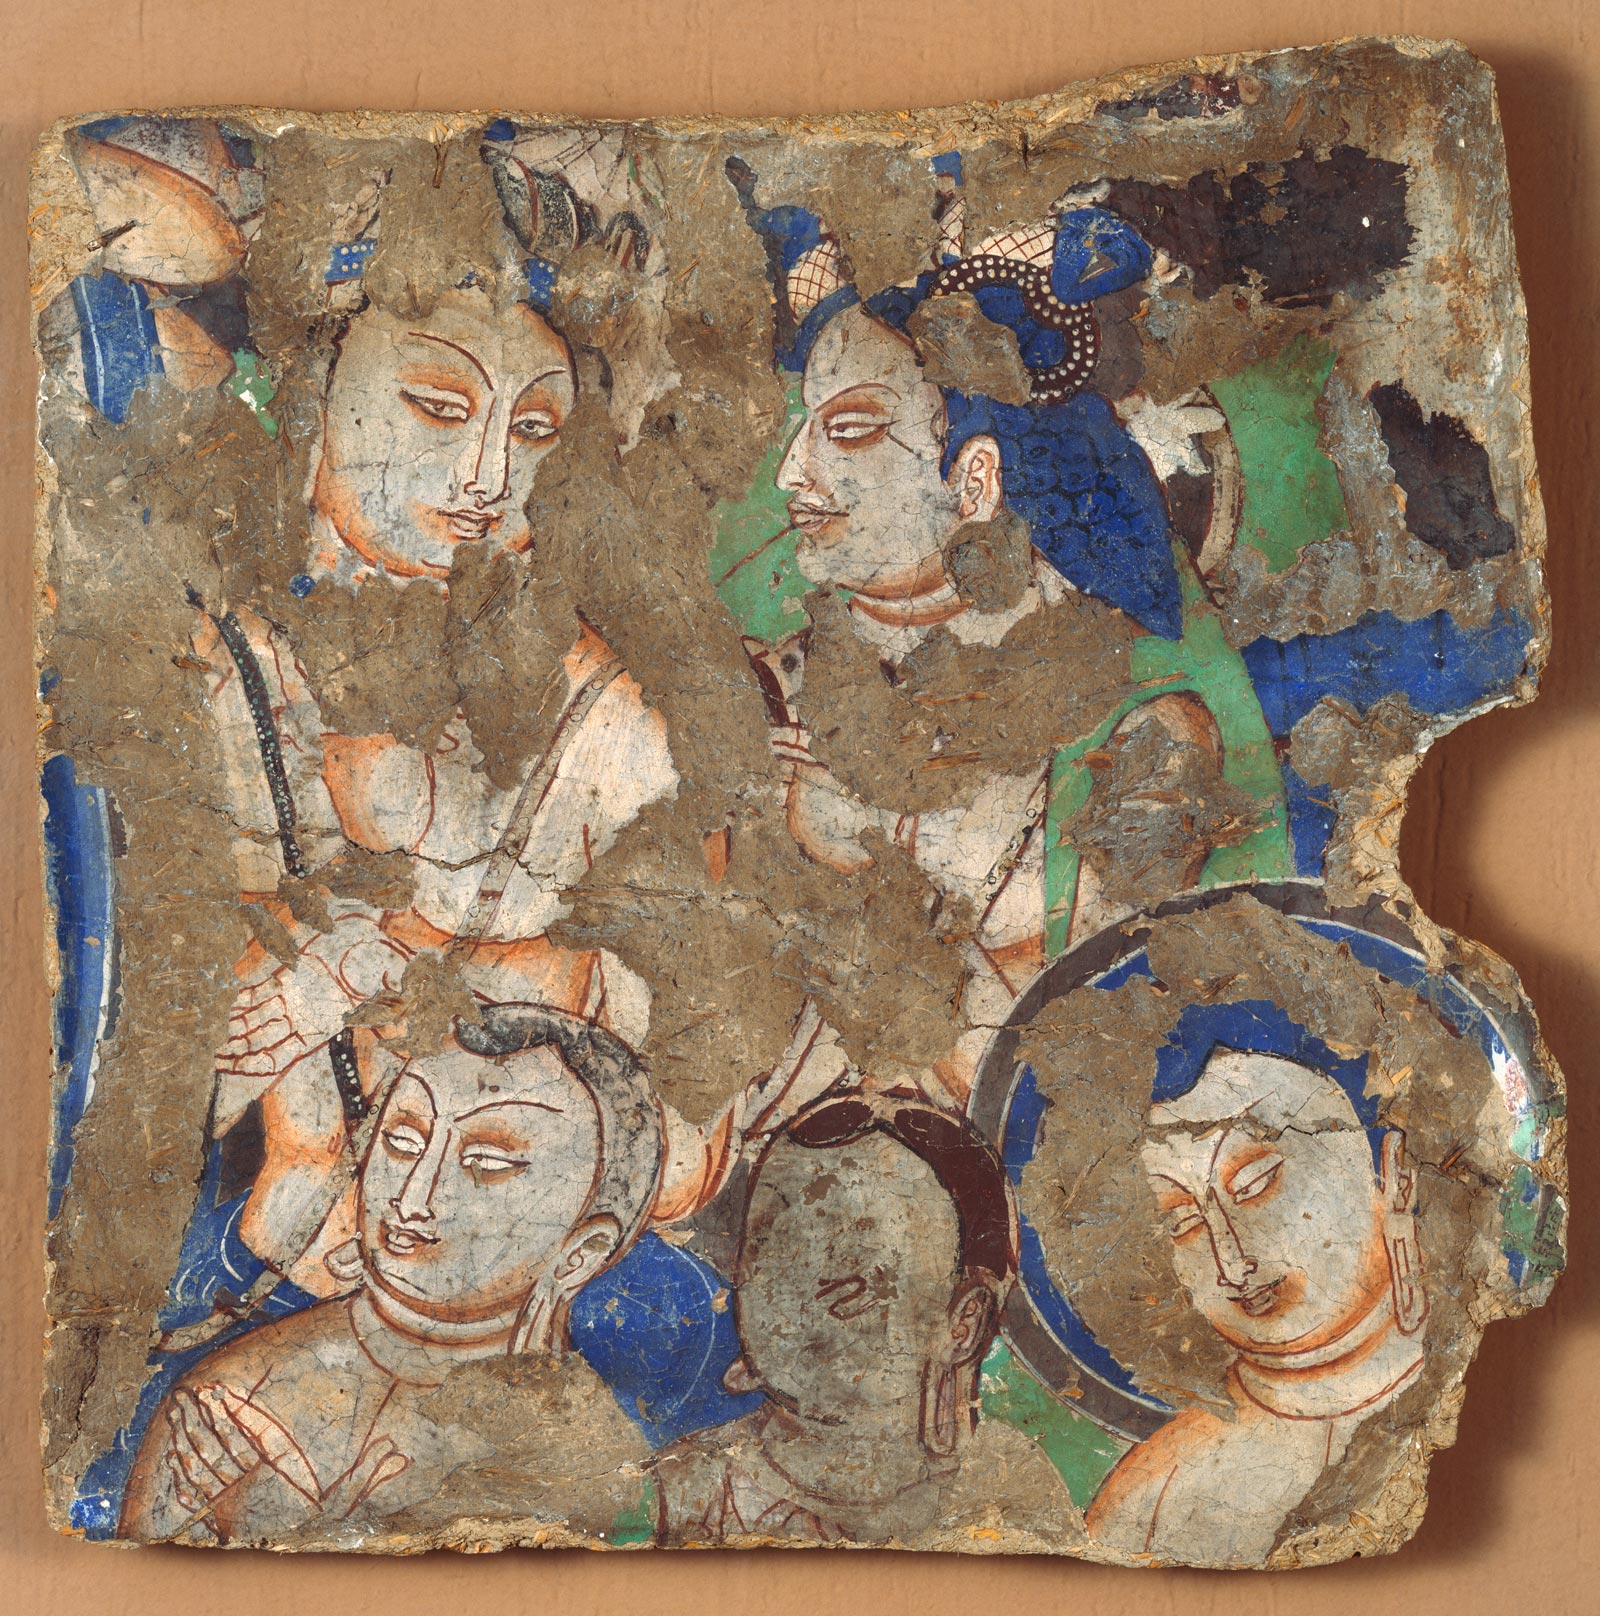 Mural fragment depicting an audience listening to the Buddha preaching